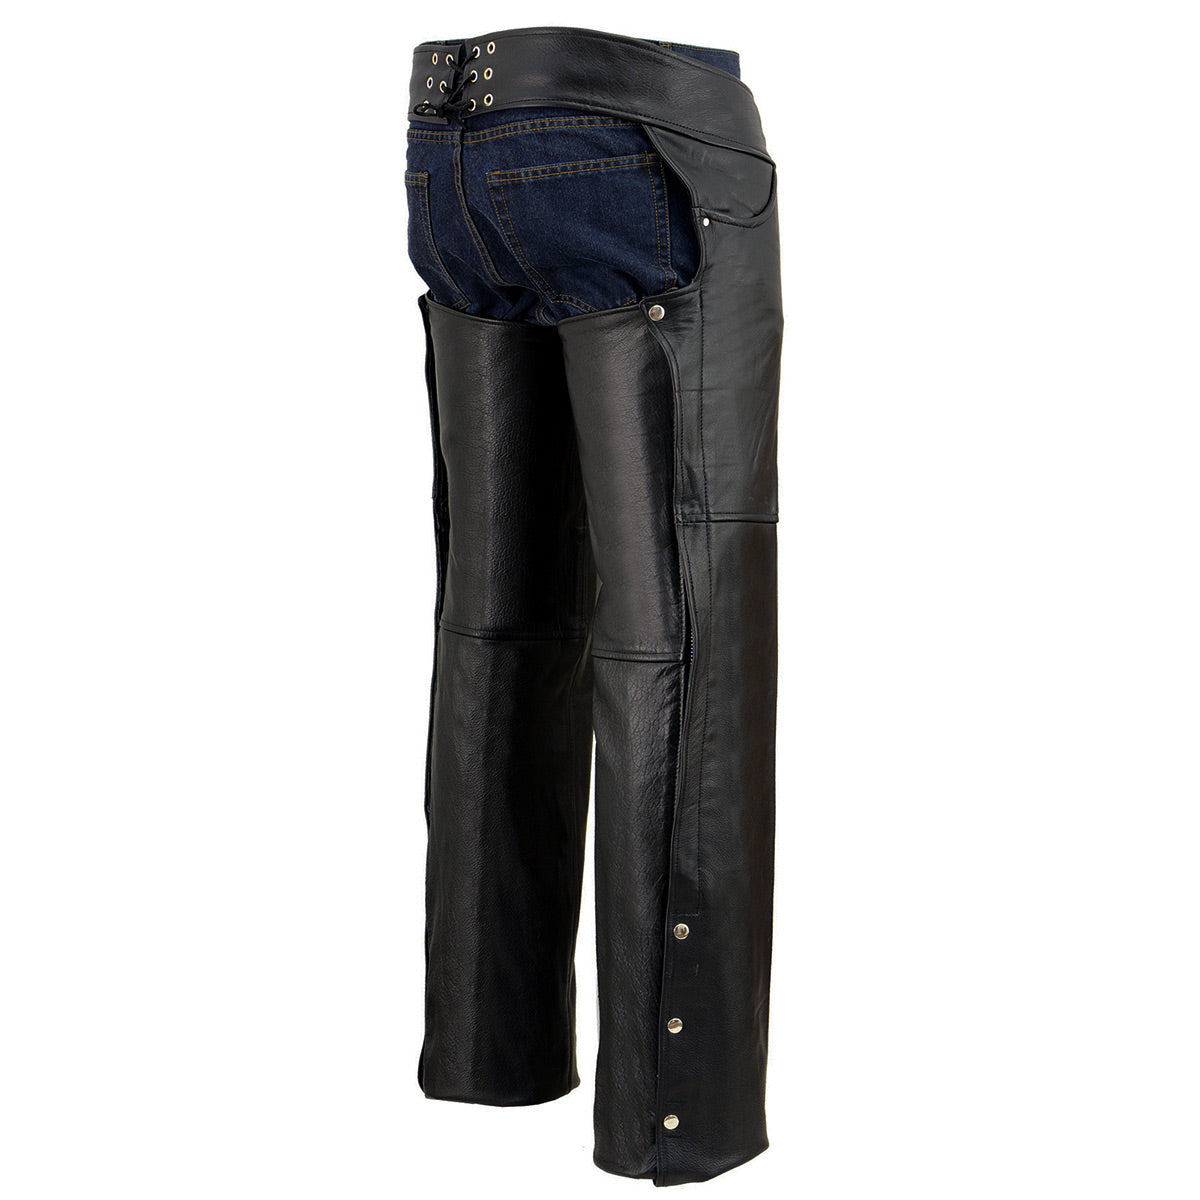 Milwaukee Leather Chaps for Men's Black Premium Leather - Classic Jean Style Pockets Motorcycle Chap - SH1101TALL